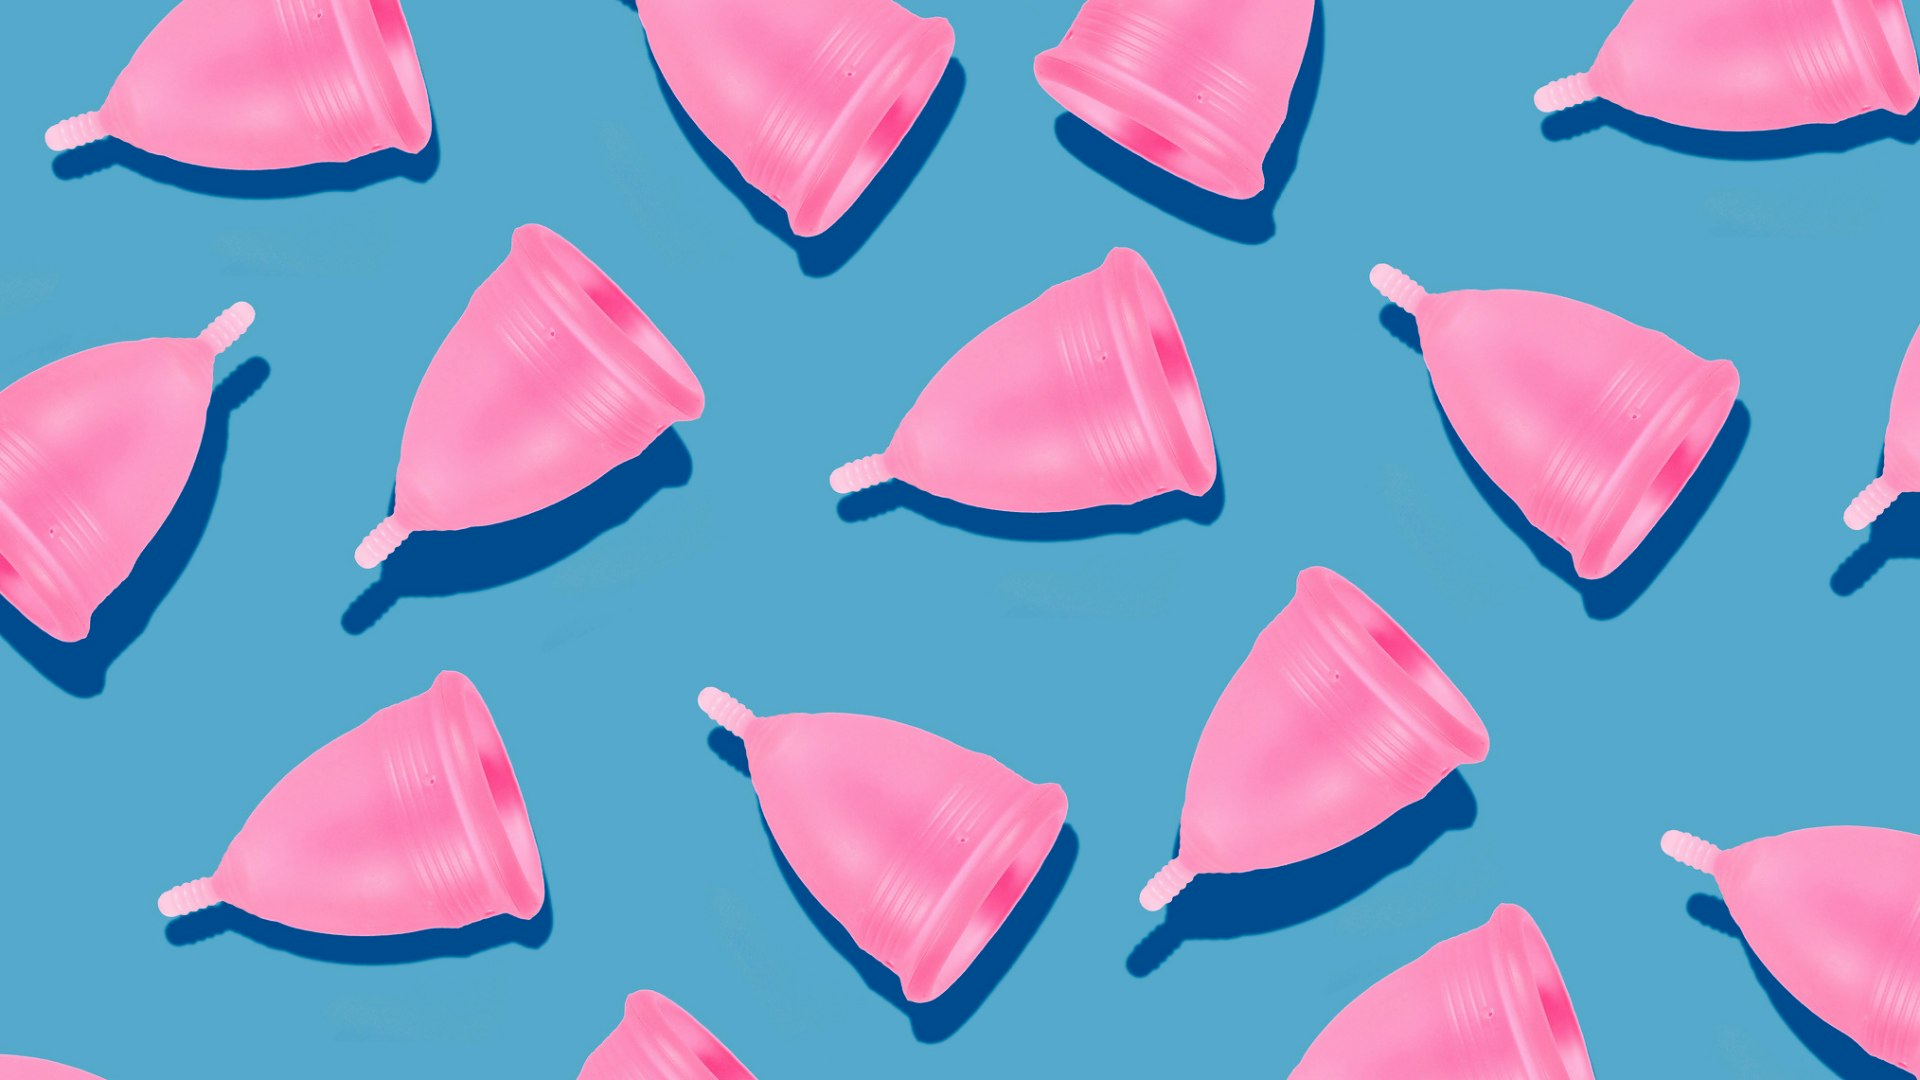 Menstrual cups are a cheaper, more sustainable way for women to